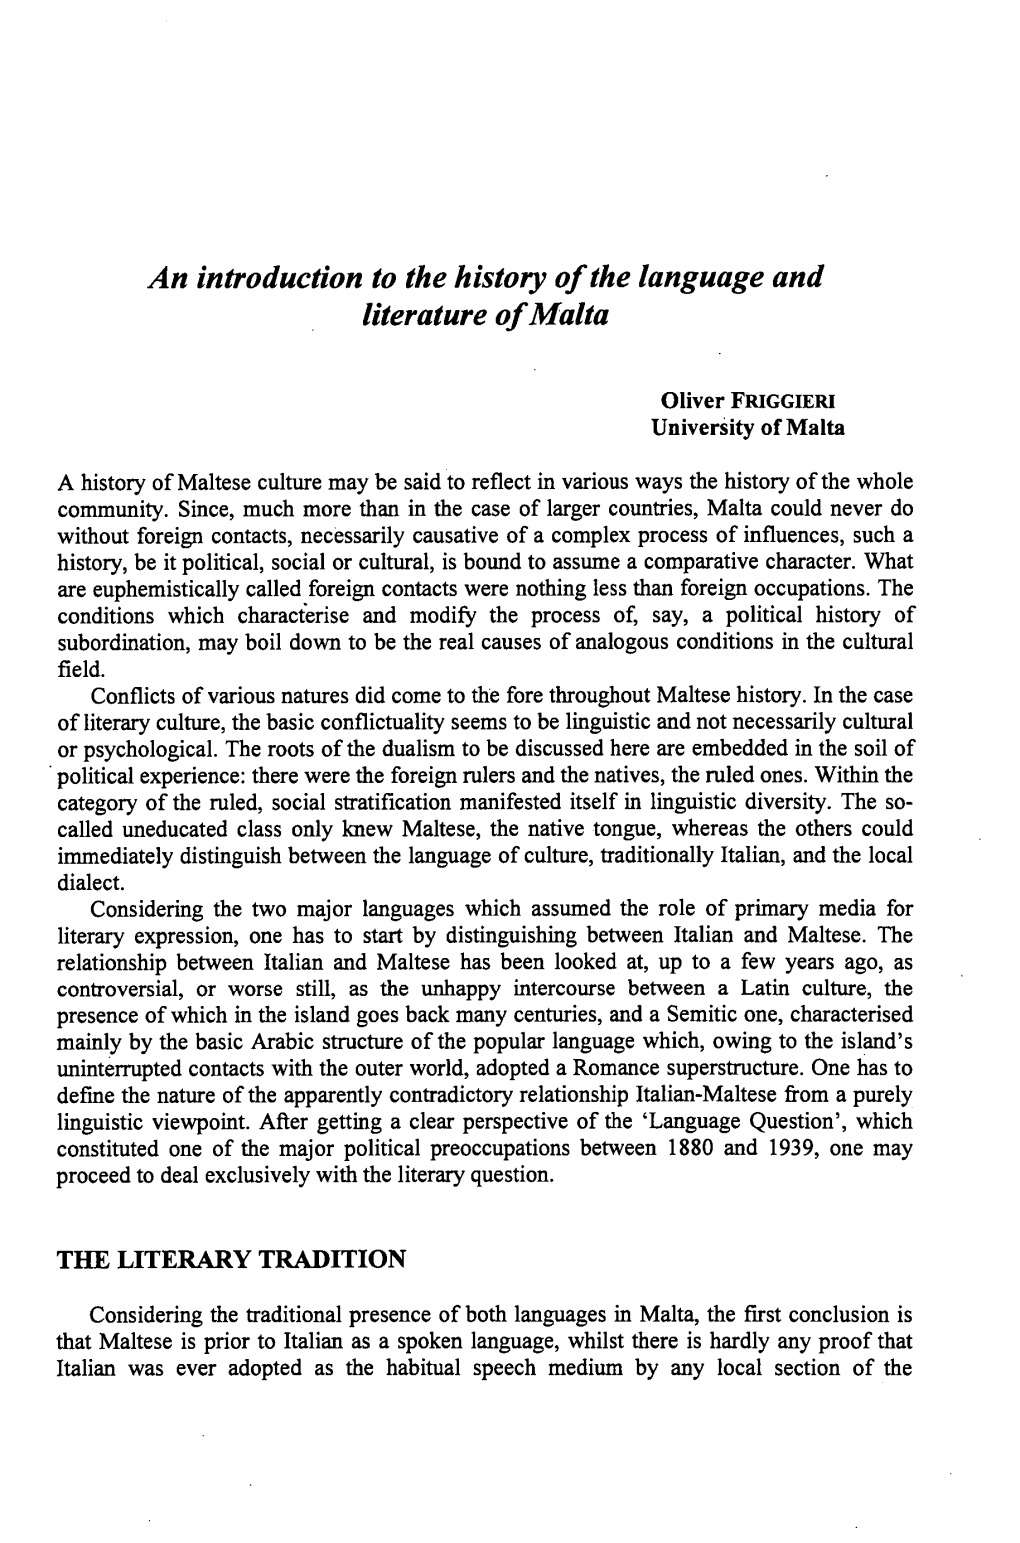 An Introduction to the History of the Language and Literature of Malta